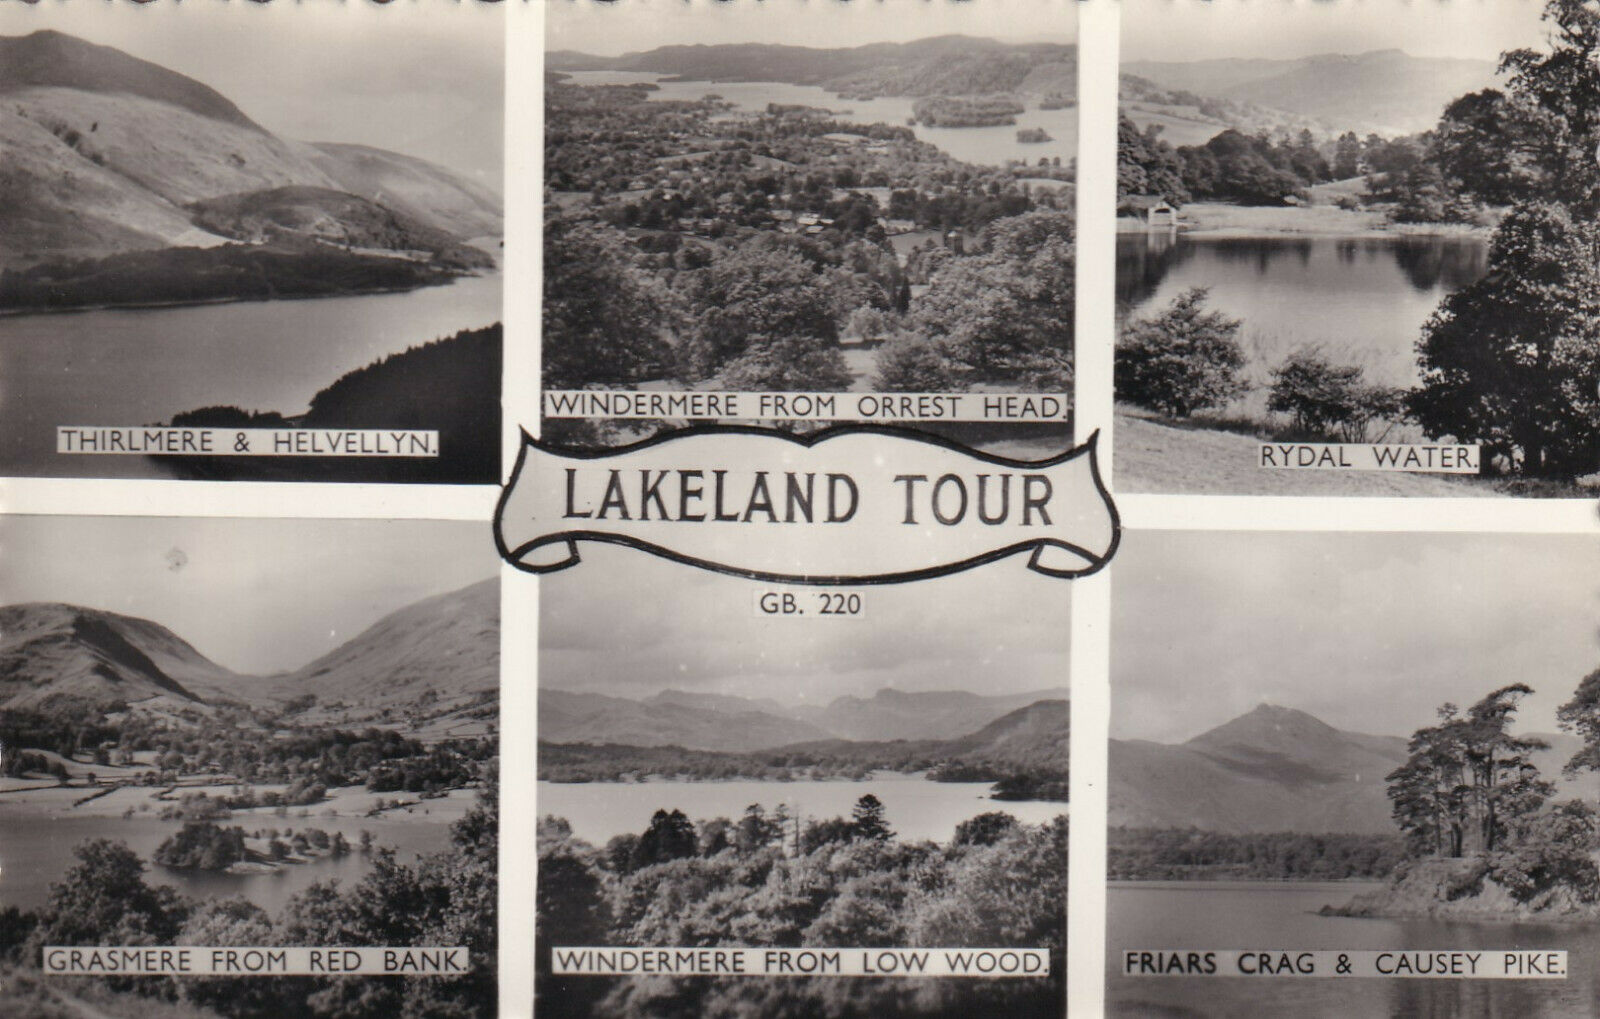 House Clearance - Real Photo multi-view service, Lakeland Tour of Lake District